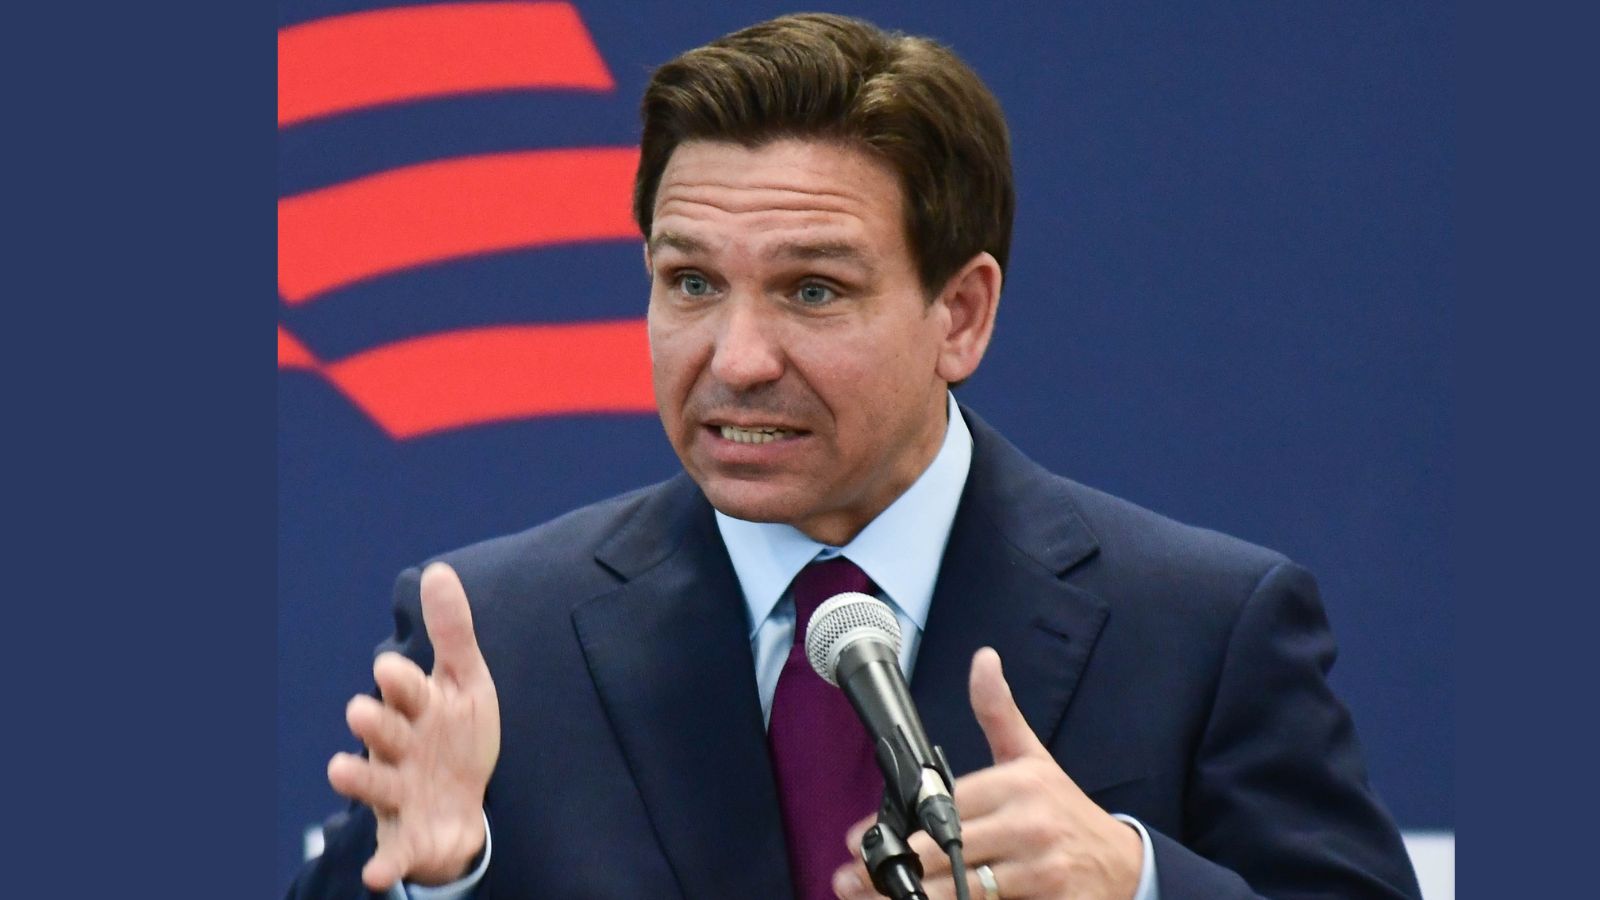 “He’ll Lose His Re-Election in Florida”: Floridians Are Fuming as DeSantis Ditches Trump